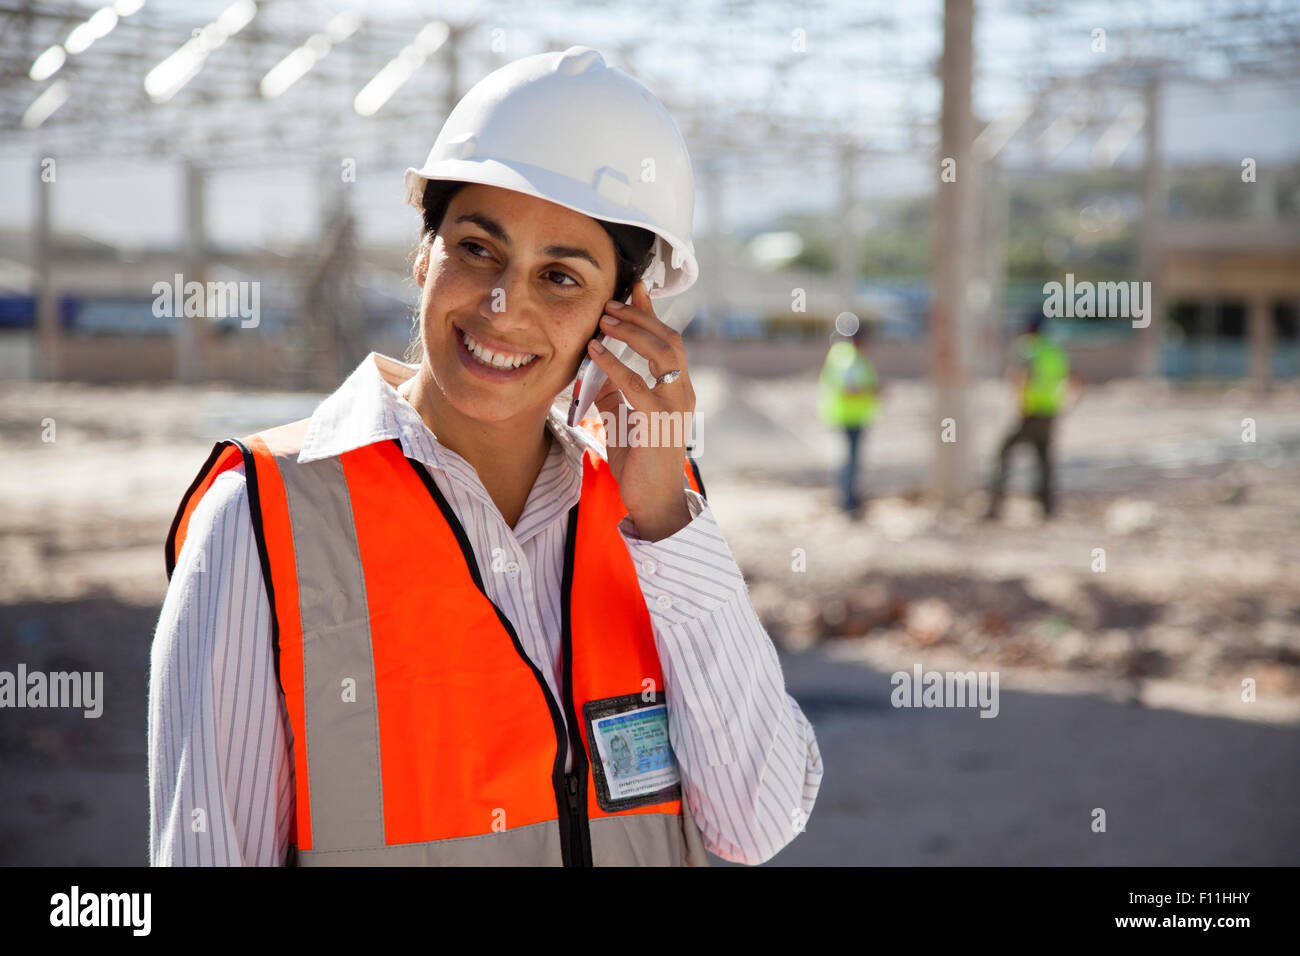 Architect talking on cell phone at construction site Banque D'Images